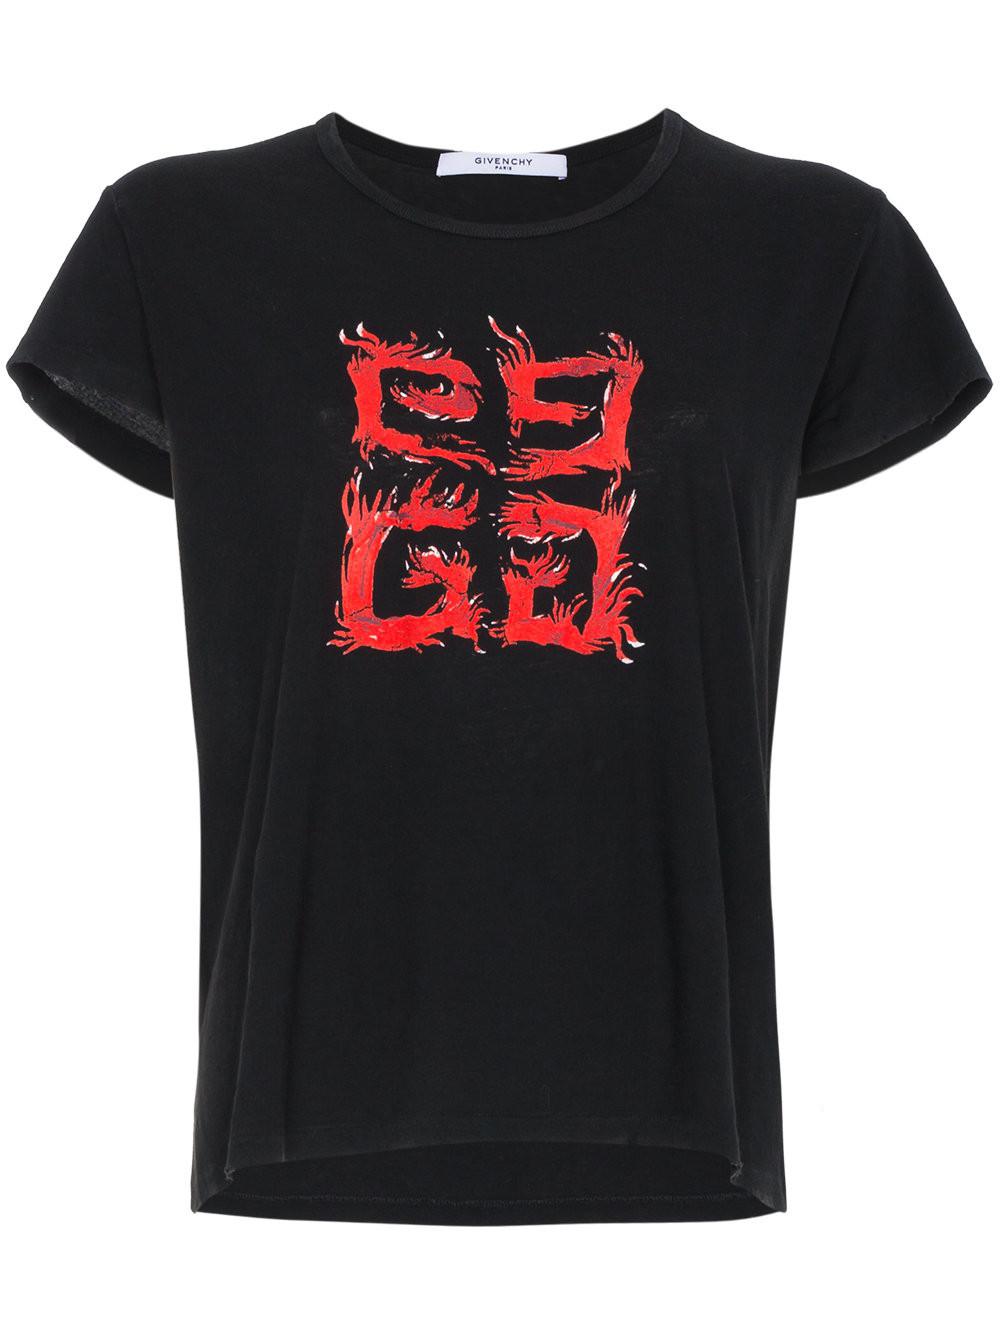 Givenchy Cotton Black T-shirt With Flame Pattern And Logo - Lyst